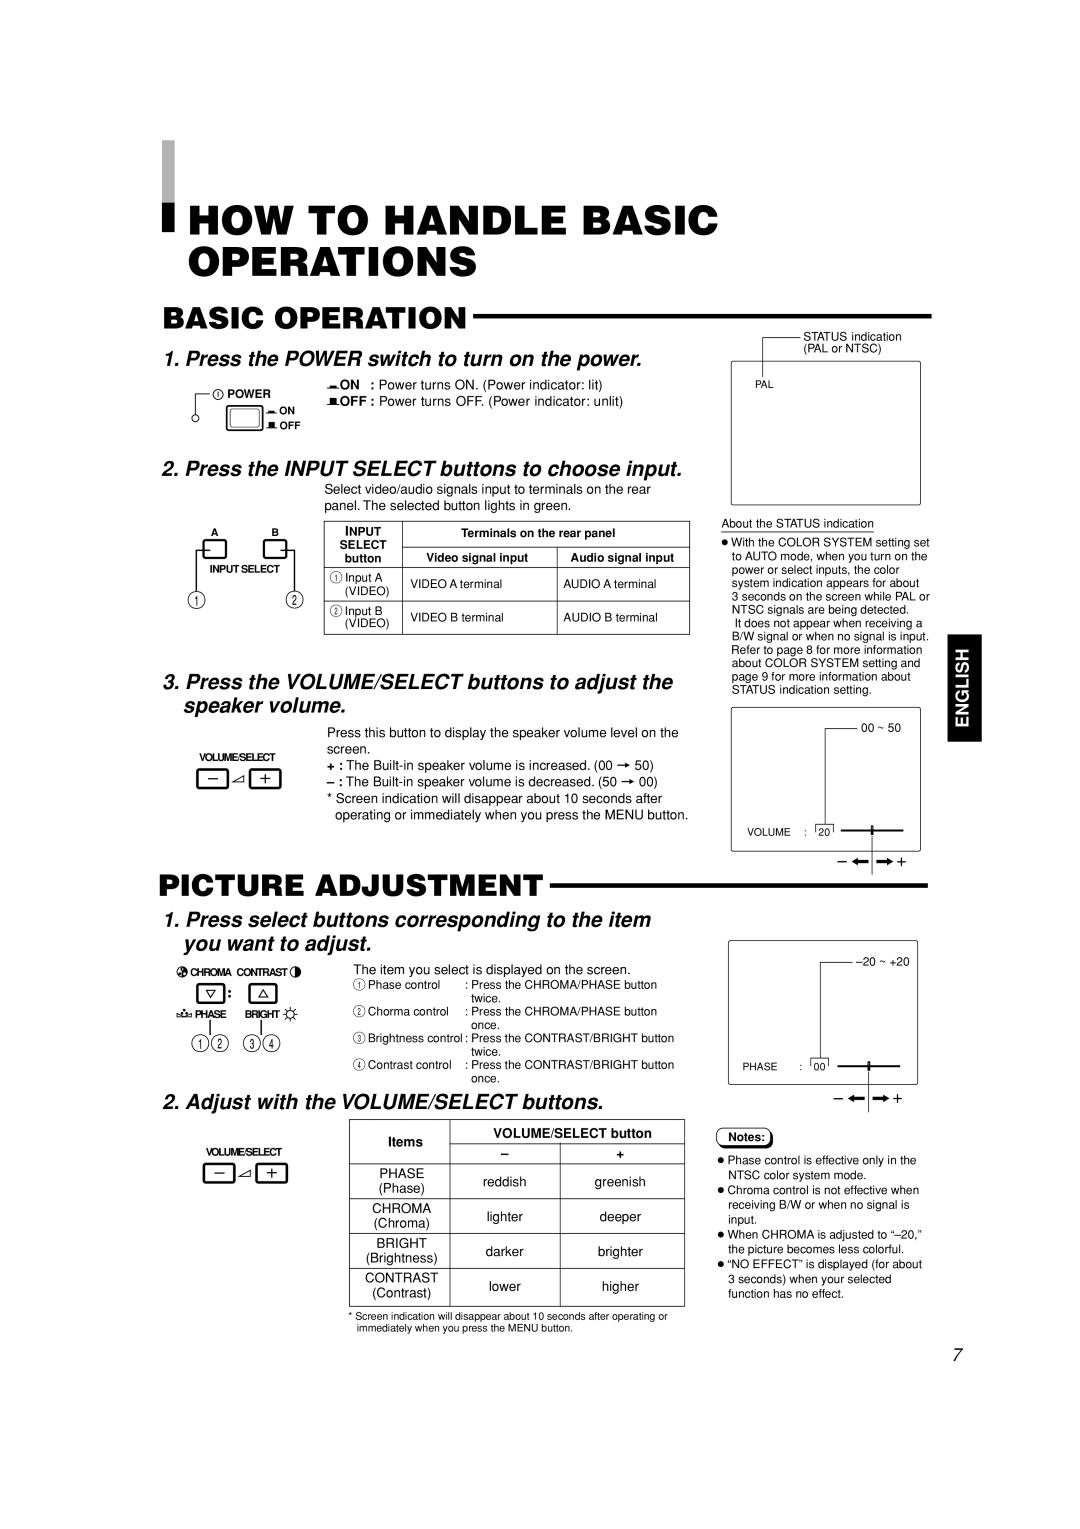 JVC TM-A101G manual How To Handle Basic Operations, Picture Adjustment, Press the POWER switch to turn on the power 